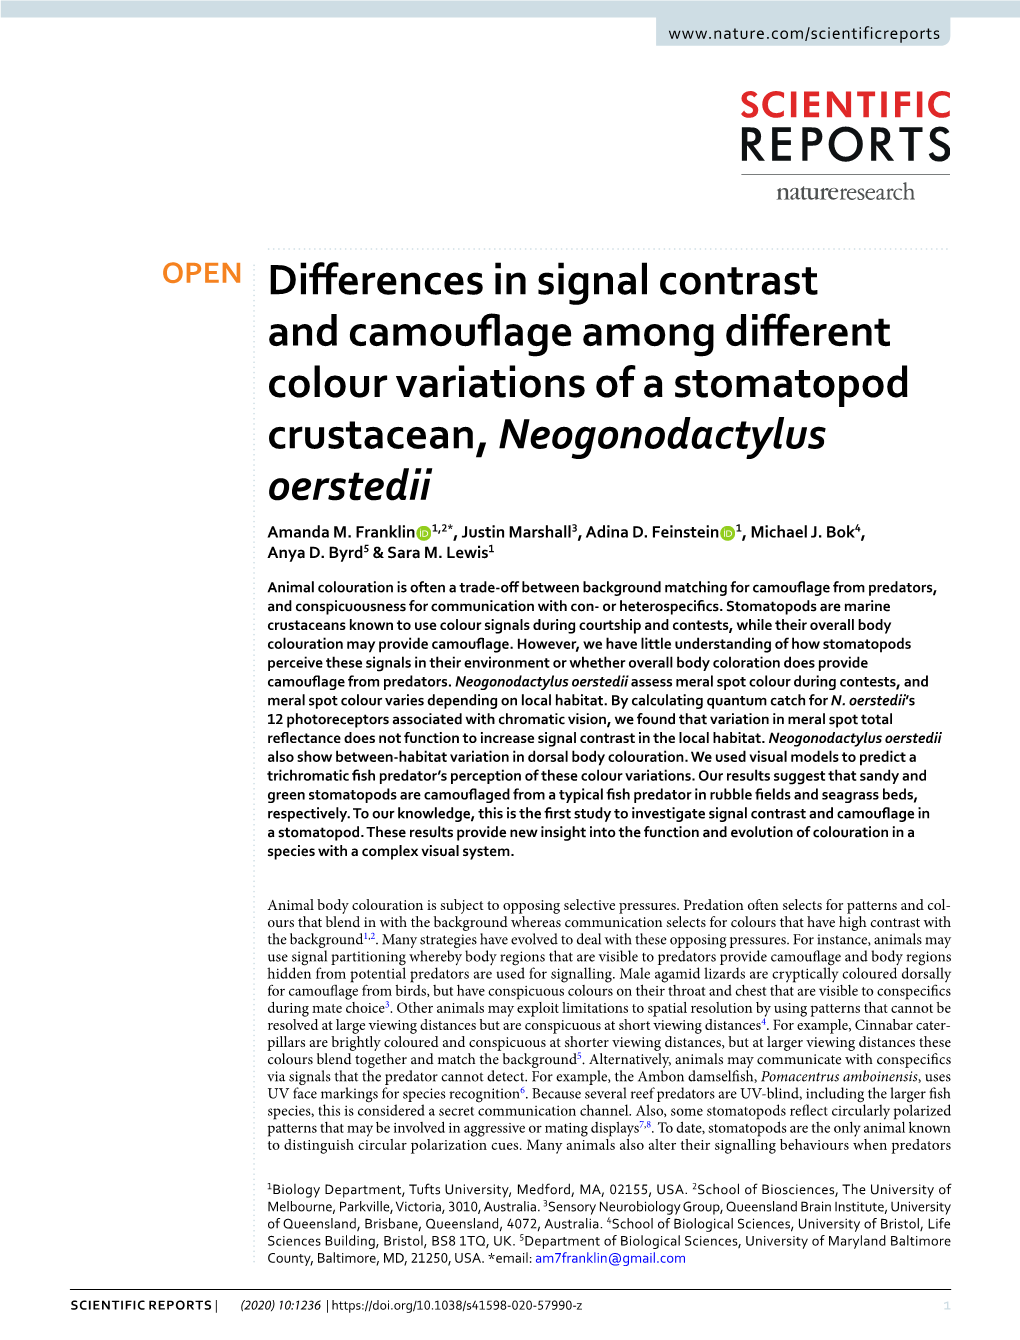 Differences in Signal Contrast and Camouflage Among Different